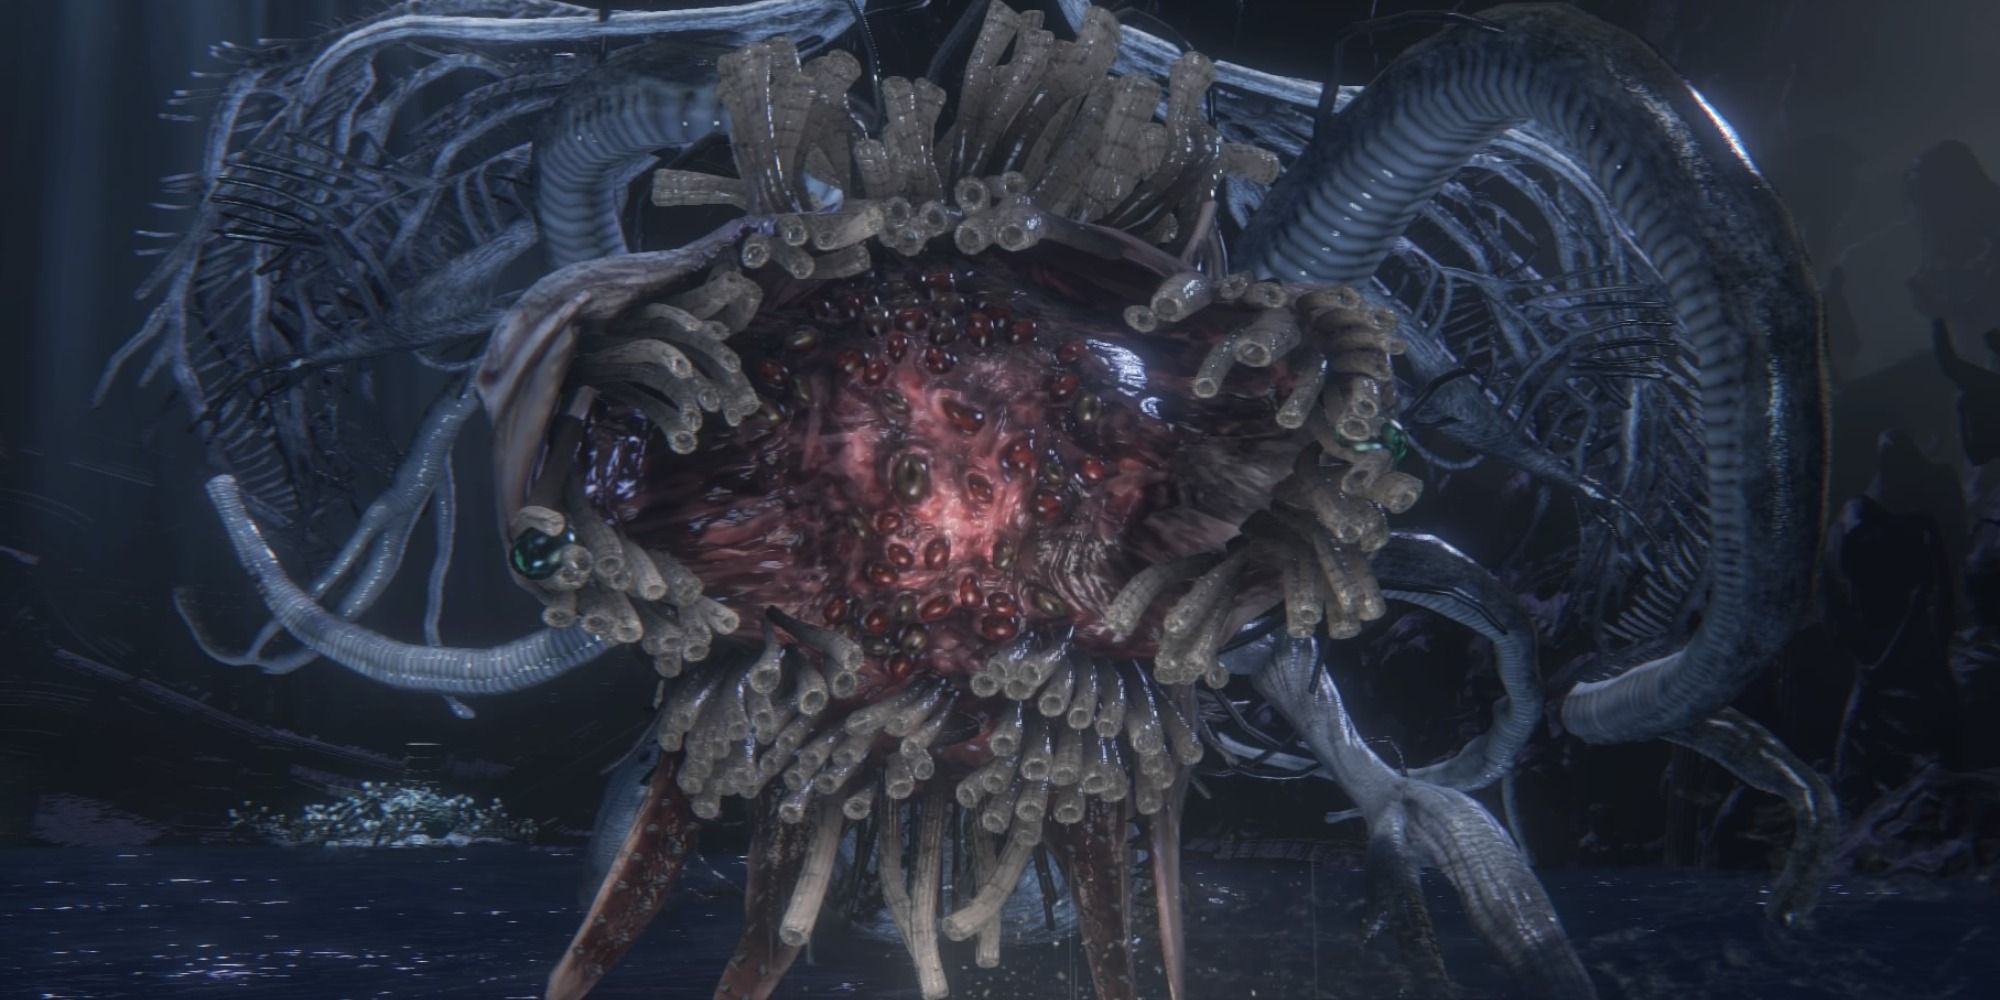 Ebrietas, Daughter of the Cosmos boss fight in Bloodborne - a large, celestial being with many tentacles